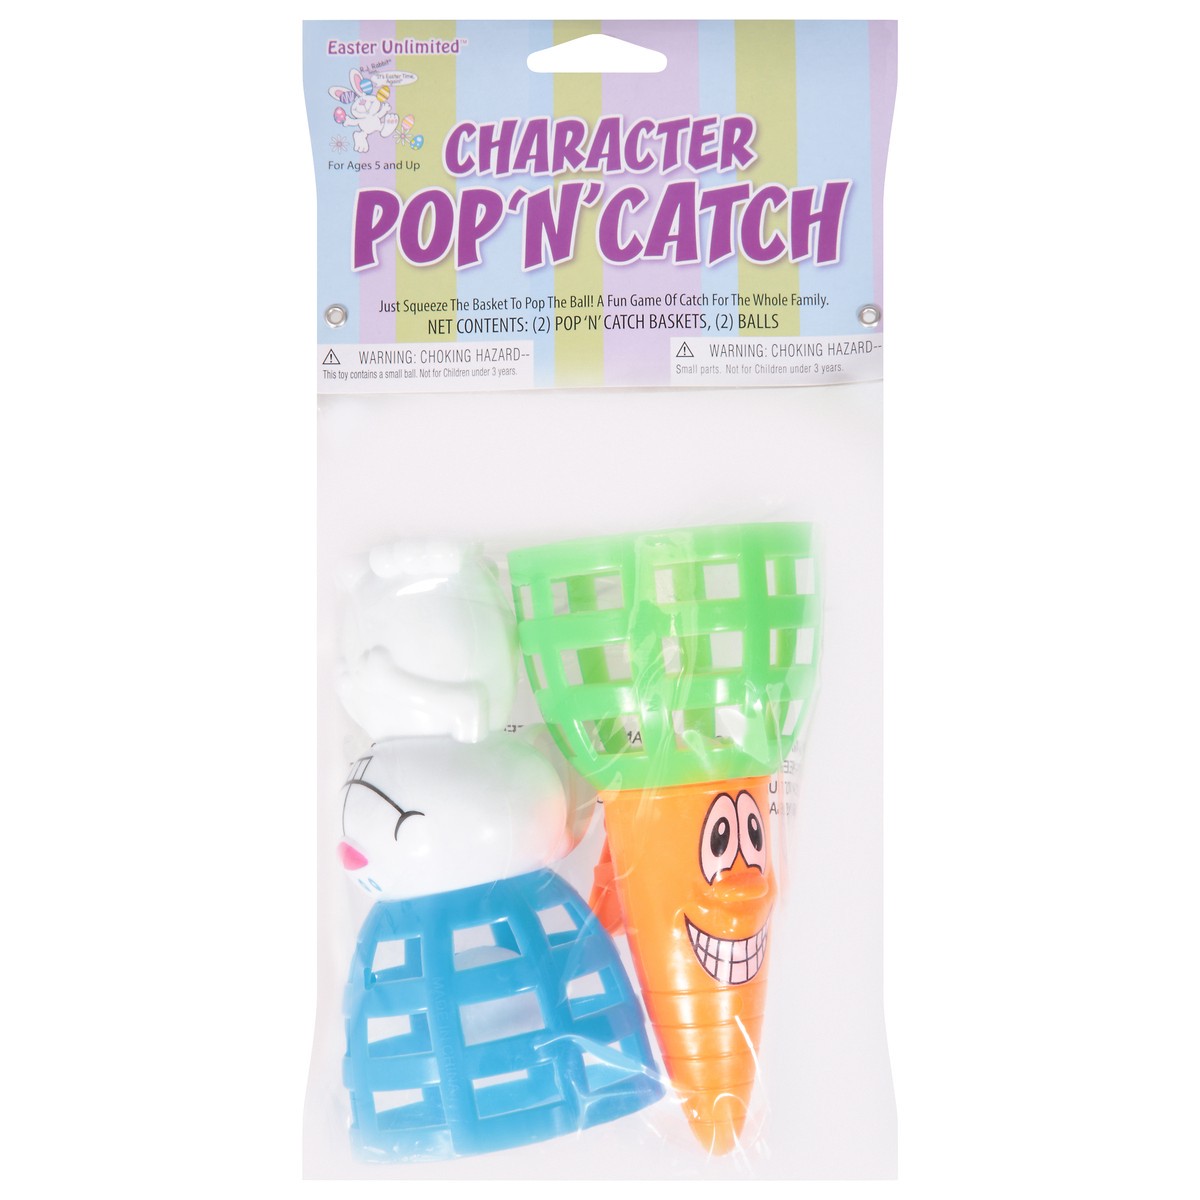 slide 1 of 11, Easter Unlimited Character Pop'n'Catch 4 1 ea, 1 ct